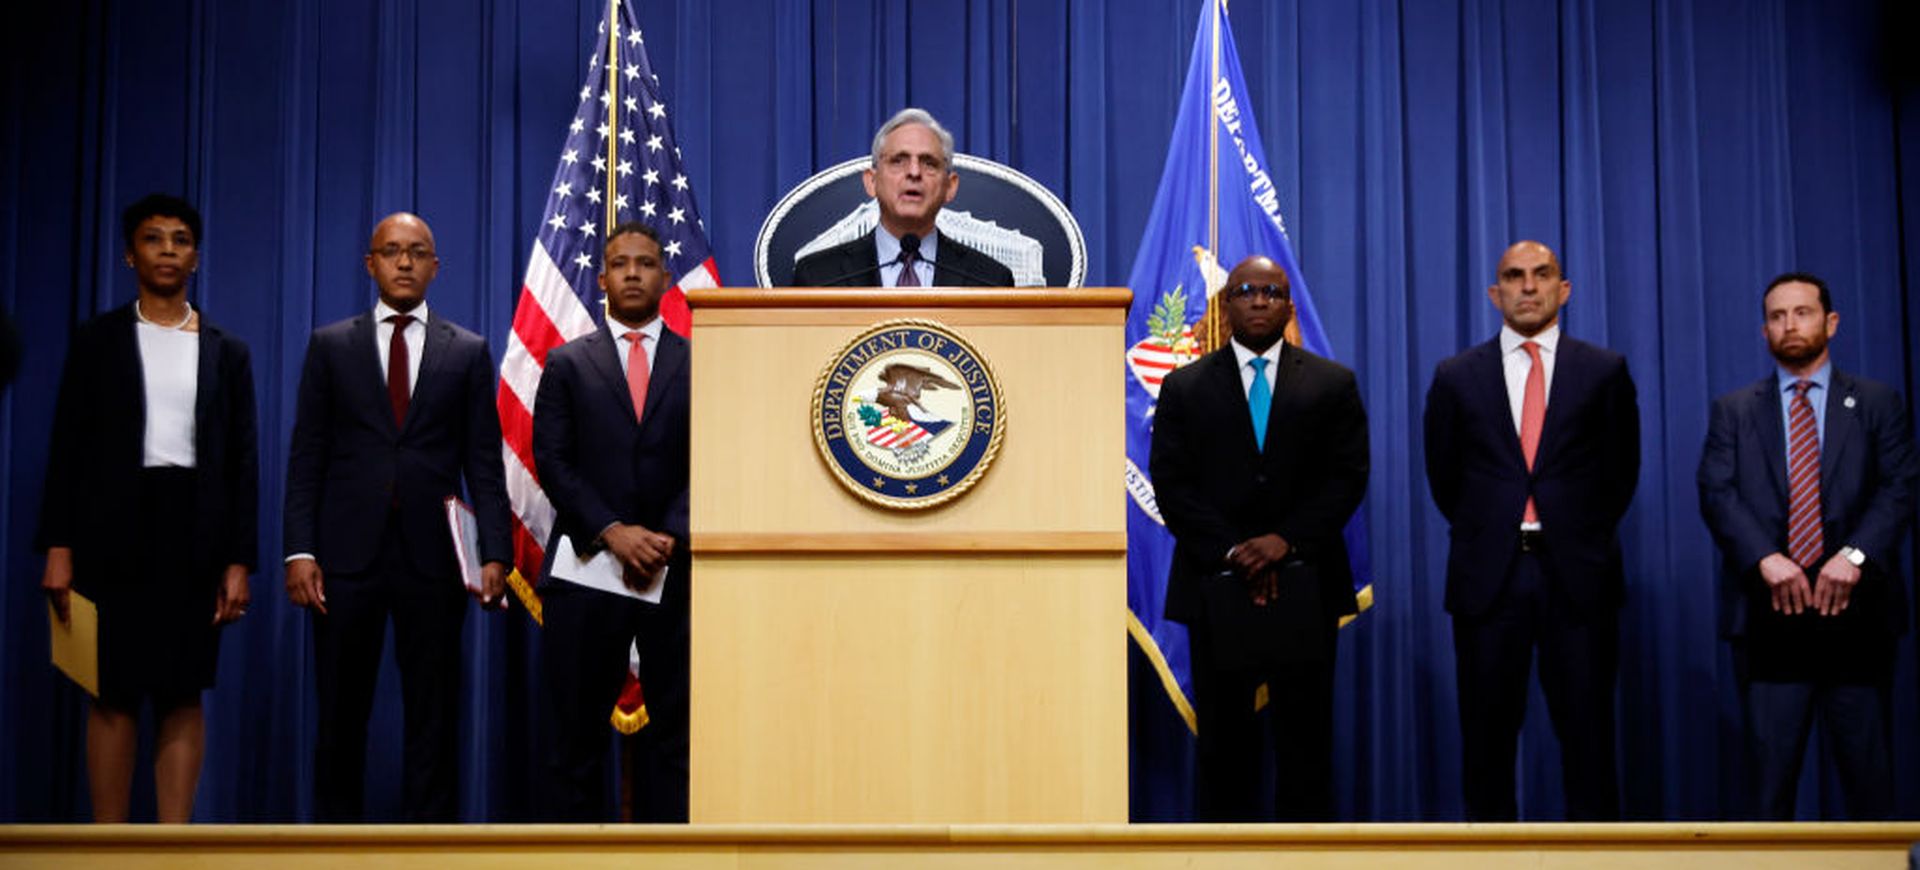 U.S. Attorney General Merrick Garland, center, announces a resolution of a foreign-bribery investigation during a news conference. The past year has brought a number of court-imposed and policy changes to the nation’s premier hacking law, the Computer Fraud and Abuse Act (CFAA). (Photo by Chip Somodevilla/Getty Images)